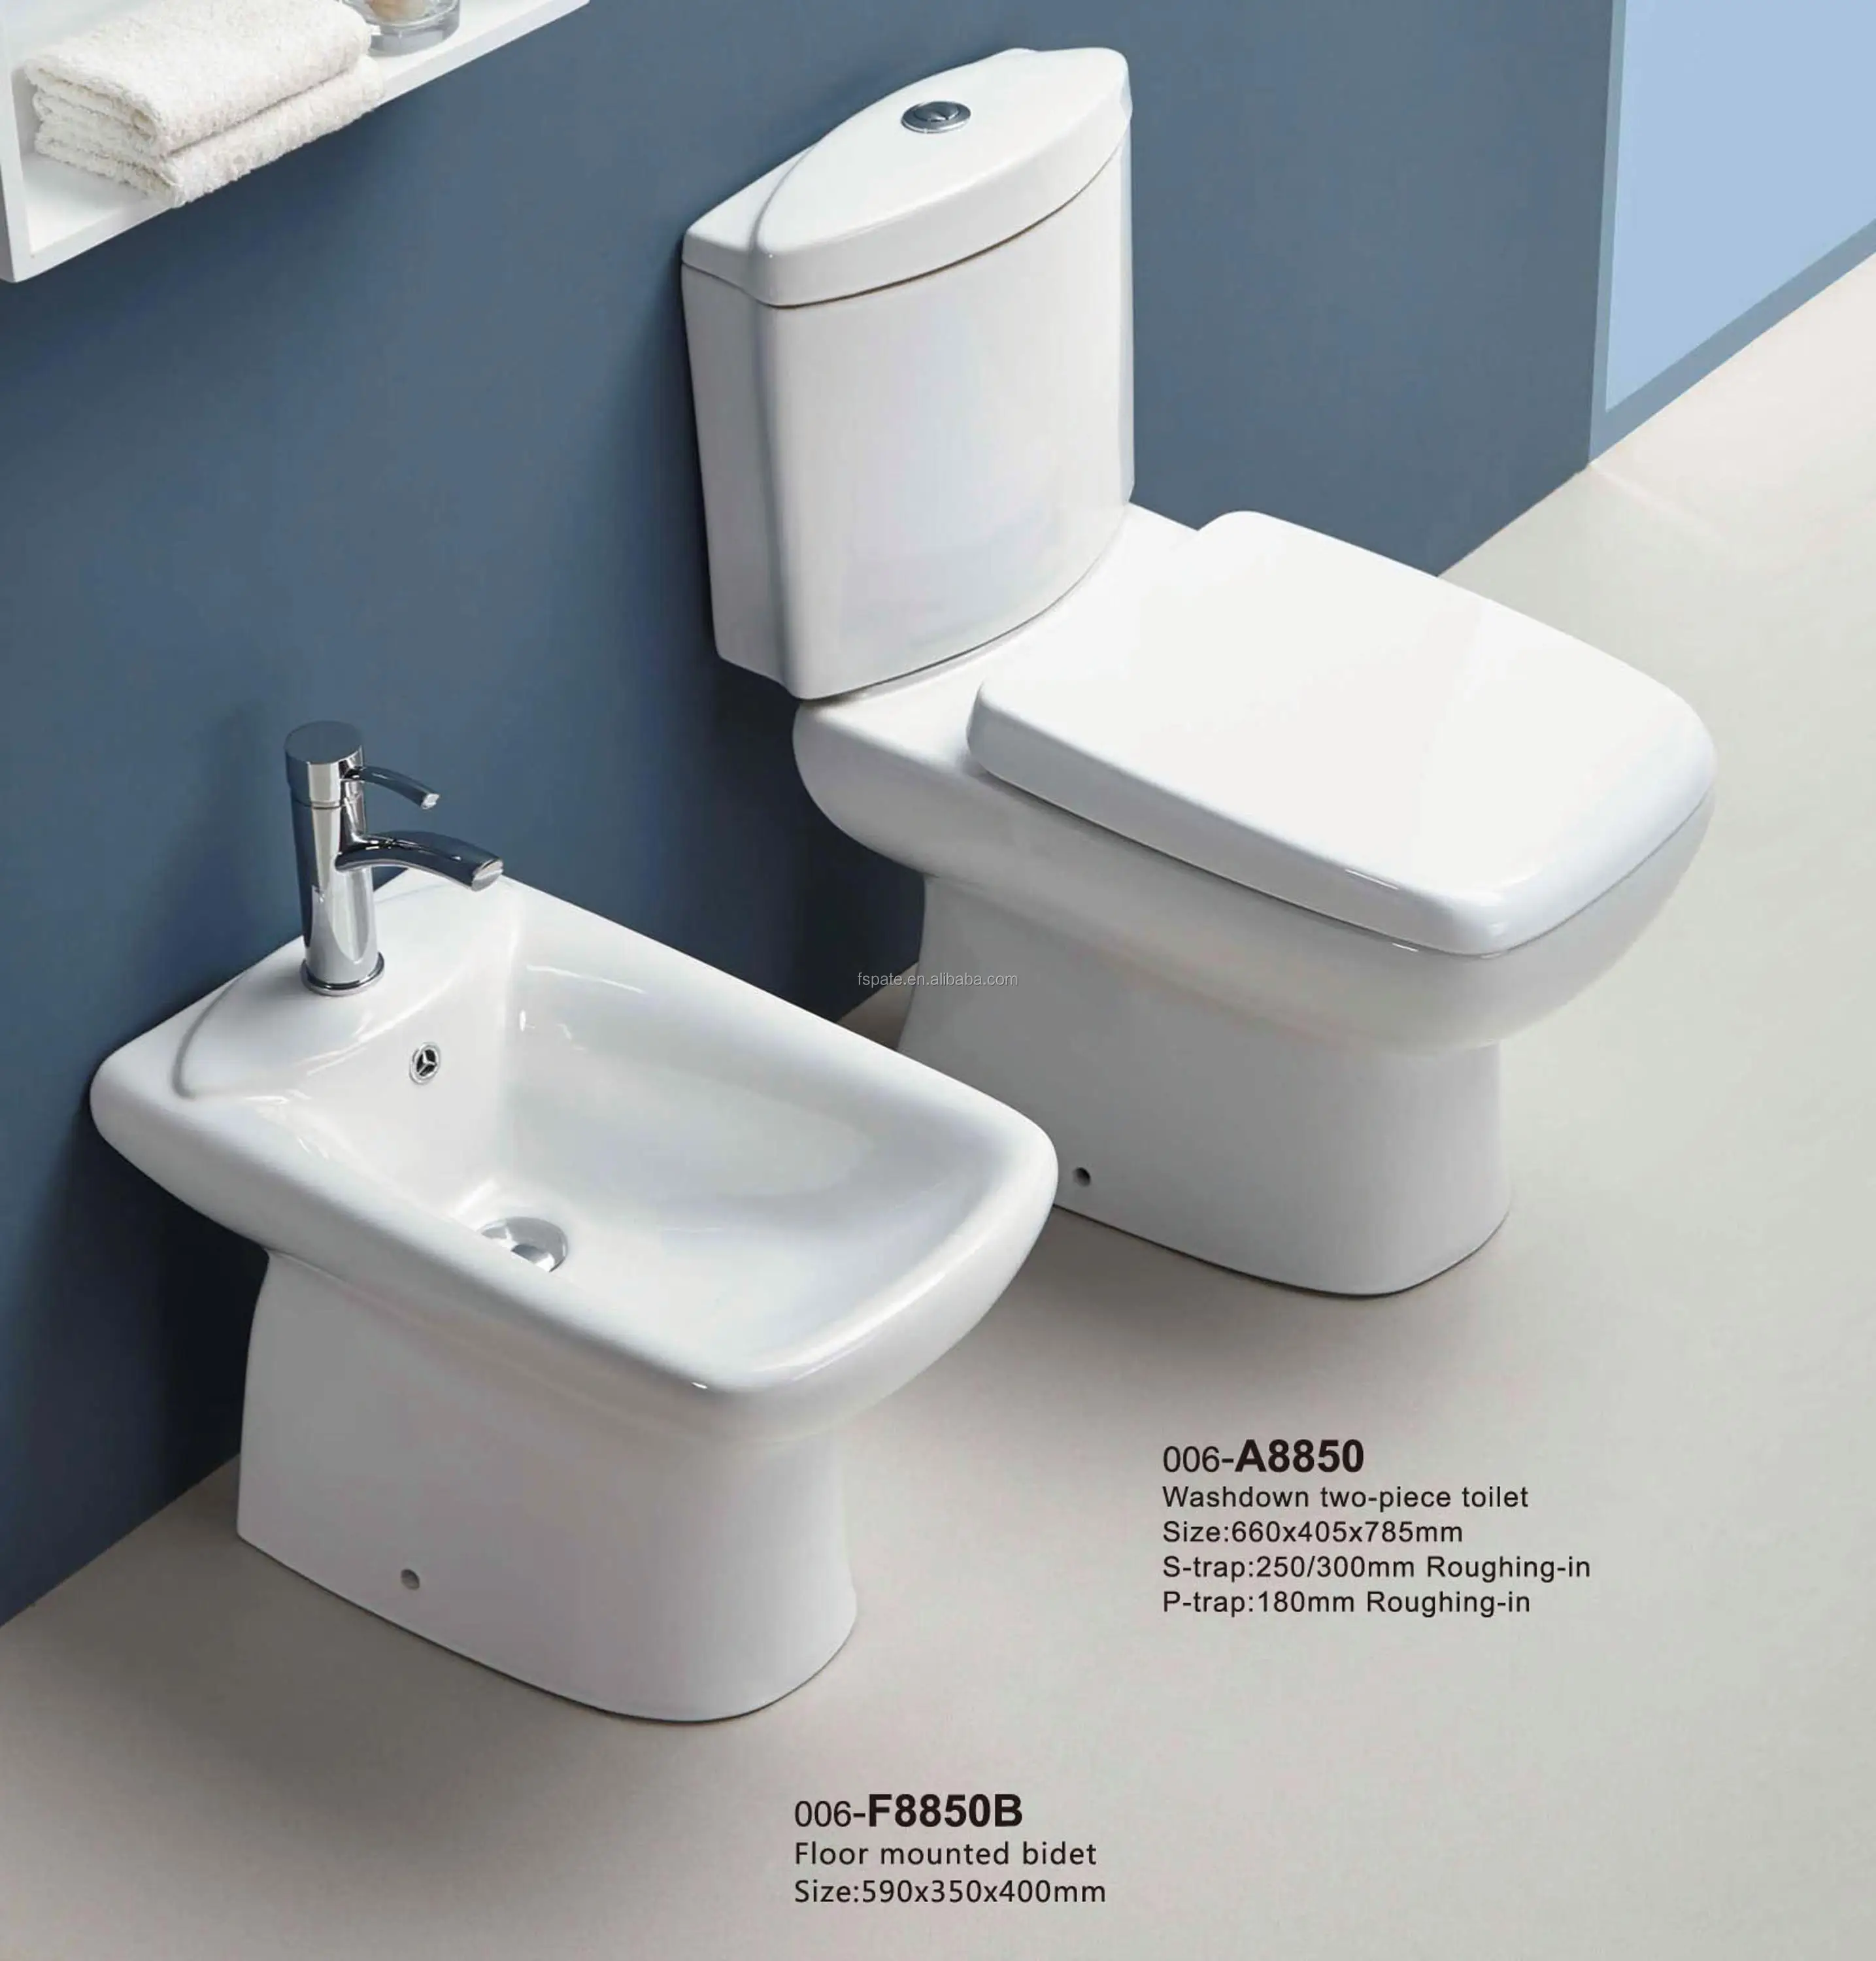 Whole Sale Washdown Two Piece Roca Toilet Wc Soft Close Water Closet Peeping Chinese Toilet Buy Peeping Chinese Toilet Two Piece Toilet Bangladesh Price Sanitary Ware Product On Alibaba Com